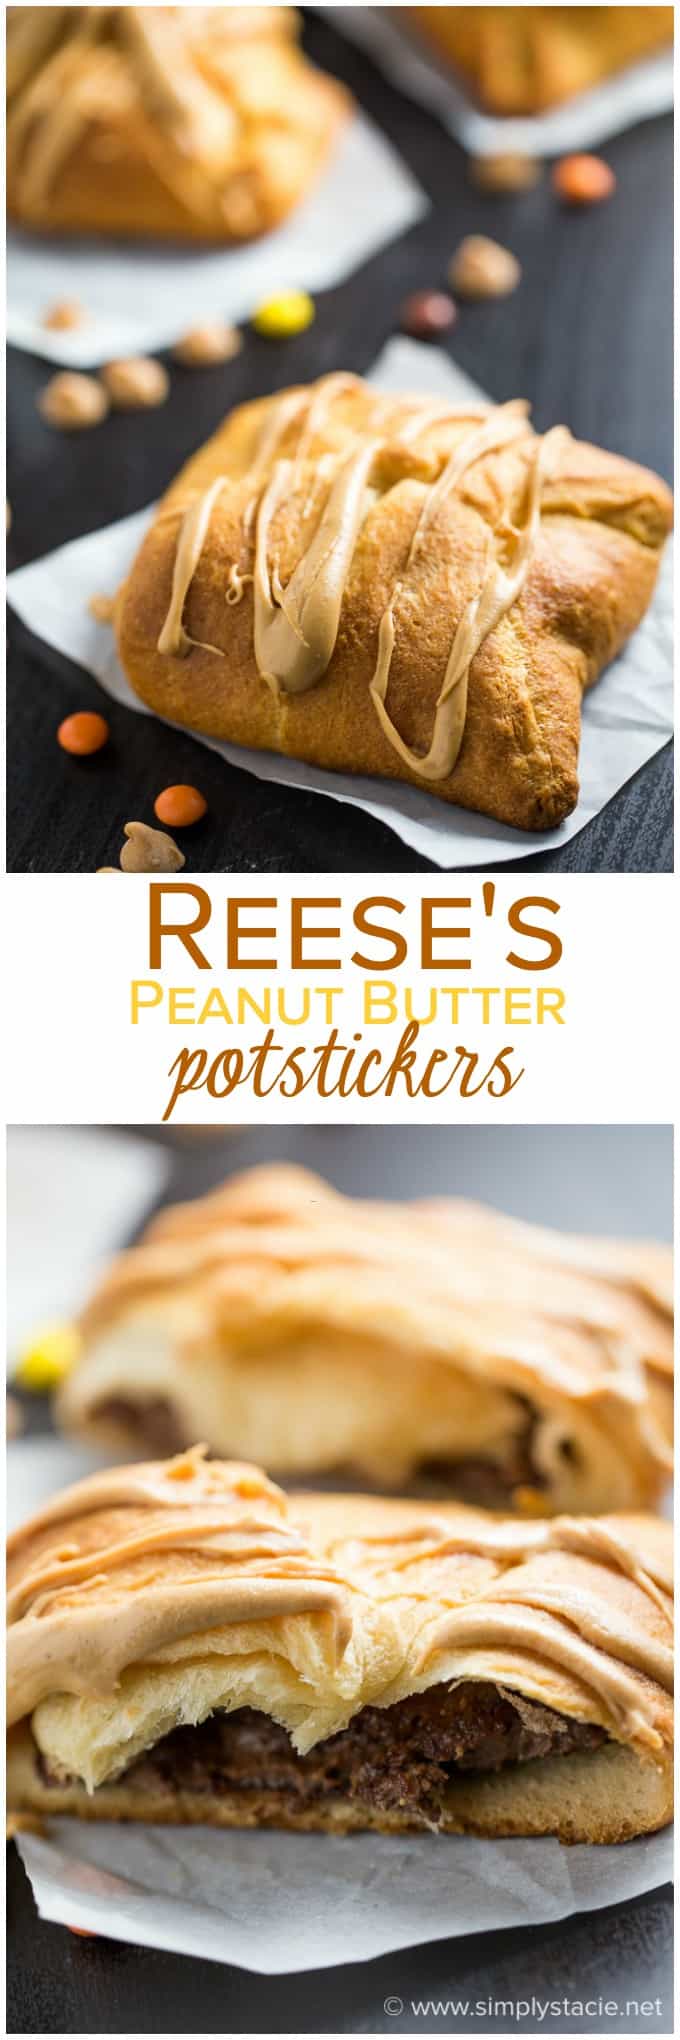 Reese's Peanut Butter Potstickers - Buttery parcels filled with rich and sweet Reese's Peanut Butter Chocolate spread and topped with melted peanut butter chips. This dessert recipe is decadent and delicious!